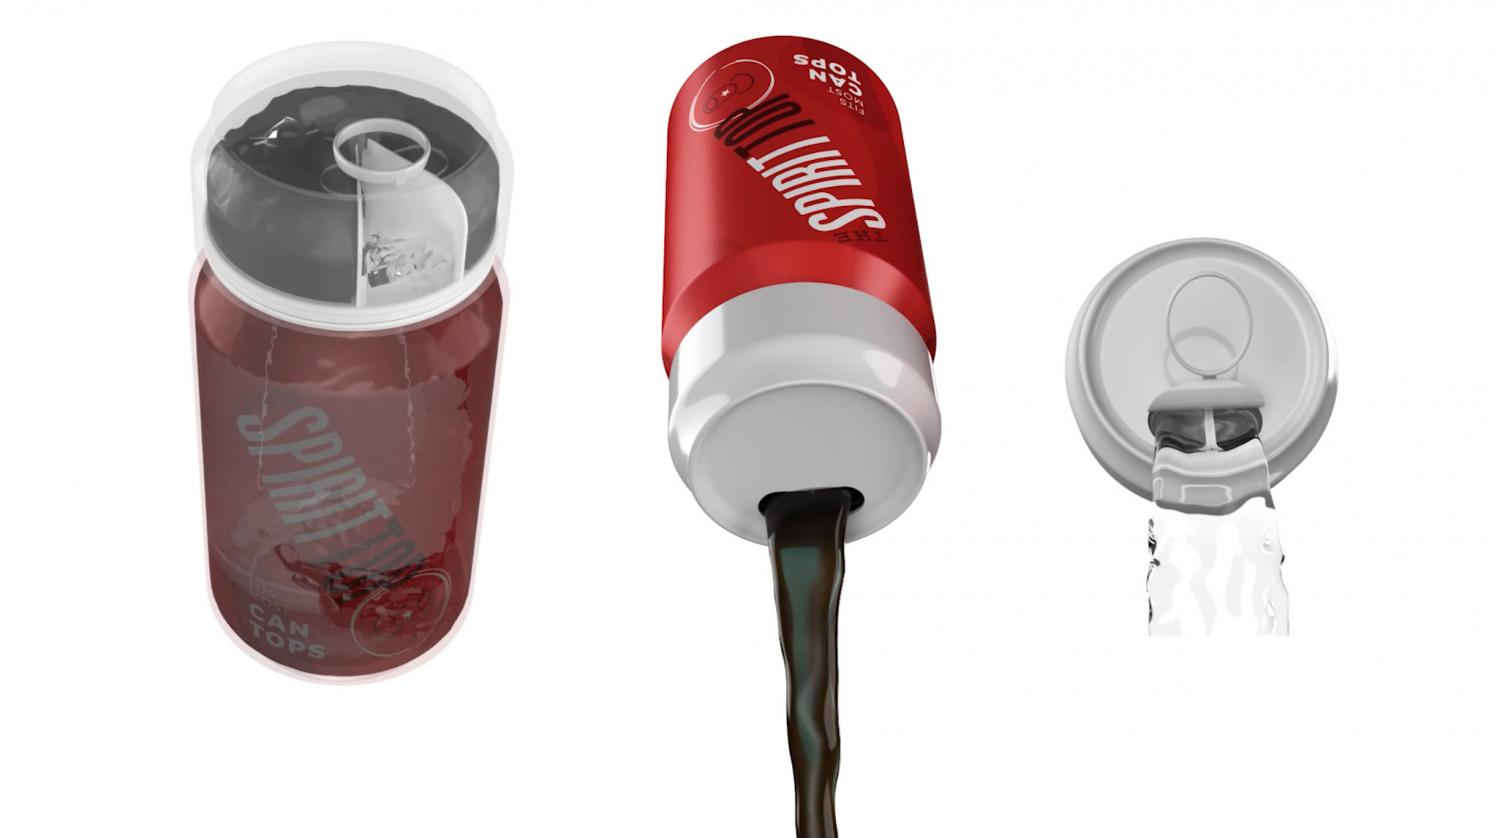 Spirit Top Alcohol Pods Turn Any Can Into Mixed Alcoholic Drink